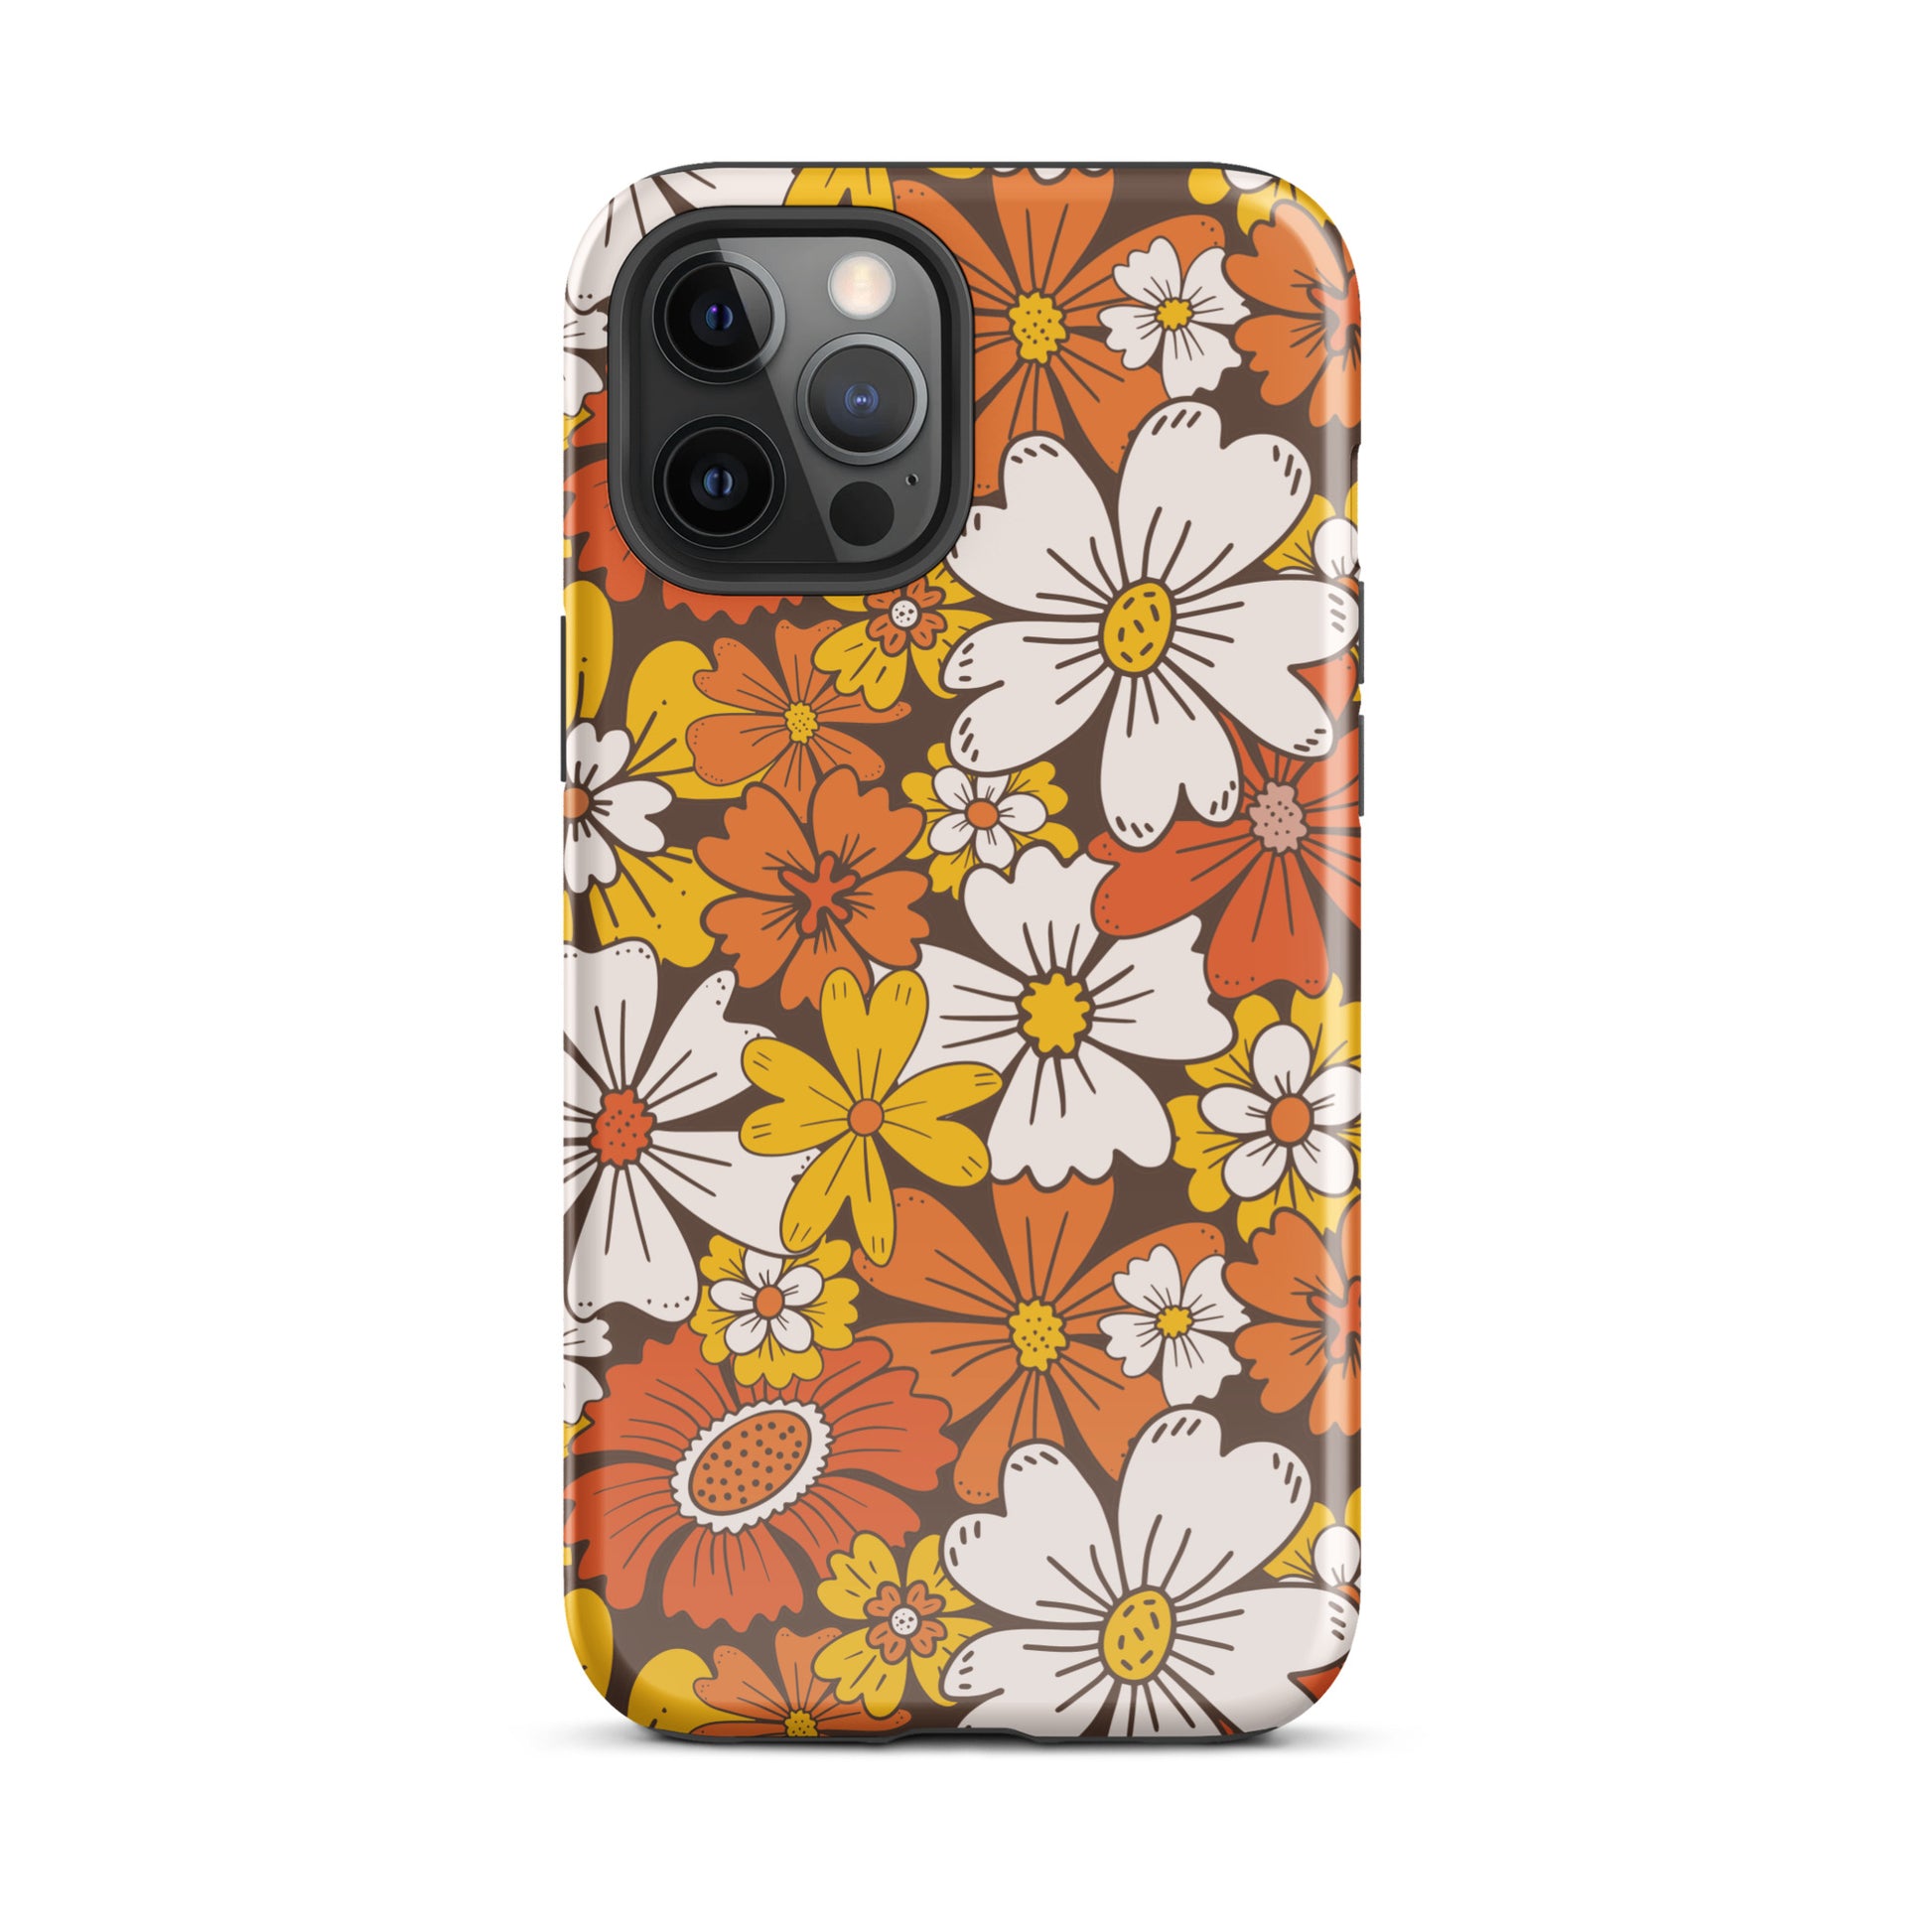 Retro Bloom iPhone Case iPhone 12 Pro Max Glossy